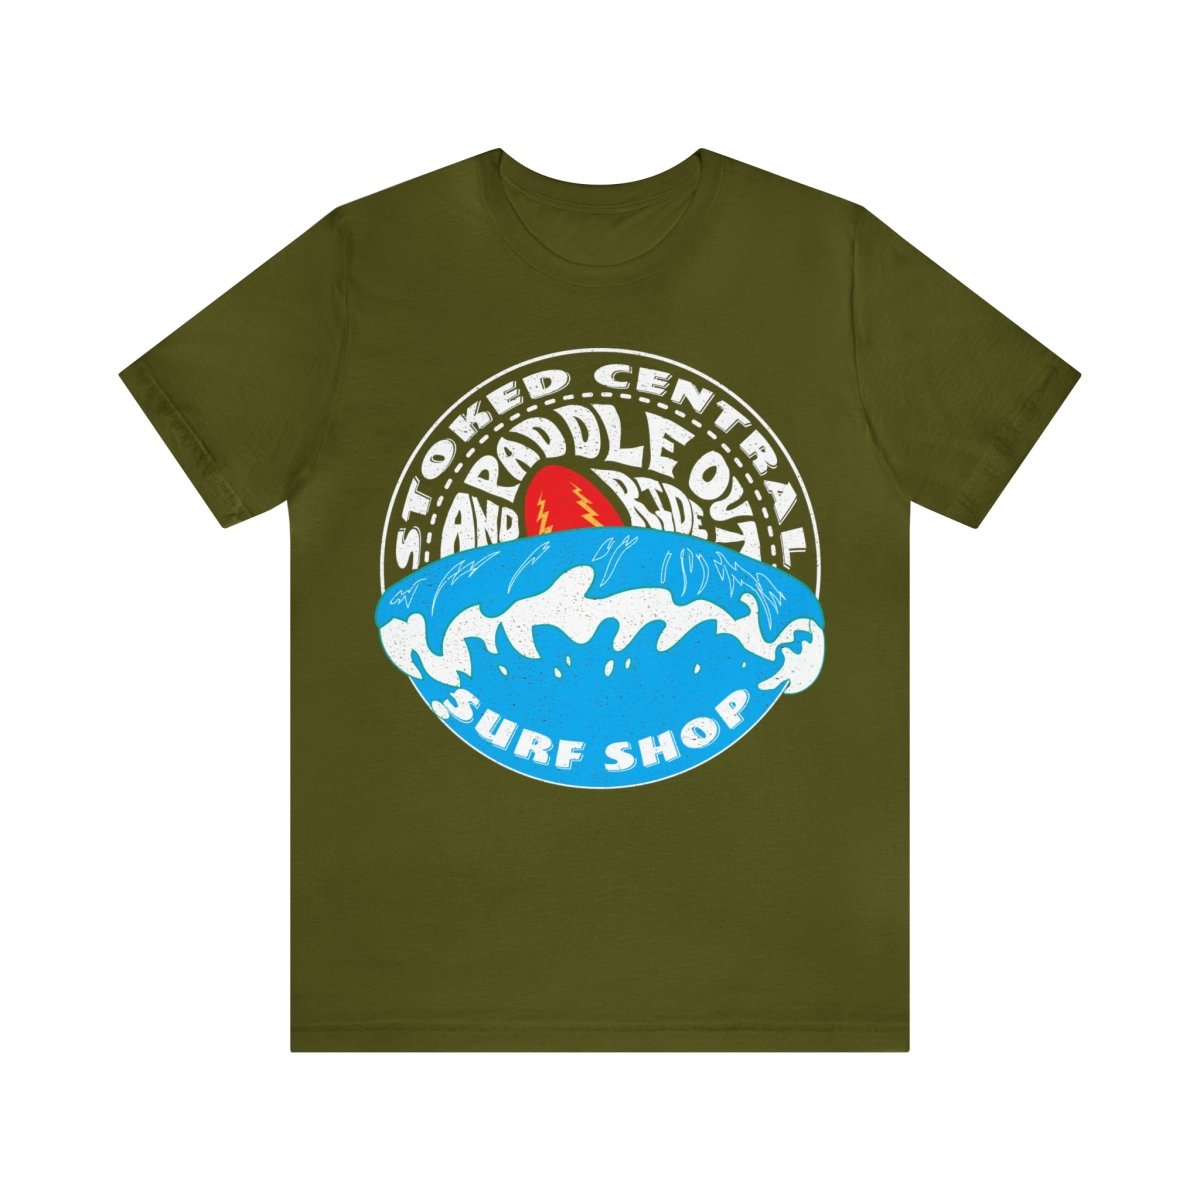 Stoked Central Surf Shop Paddle Out Premium T-Shirt, Malibu, California